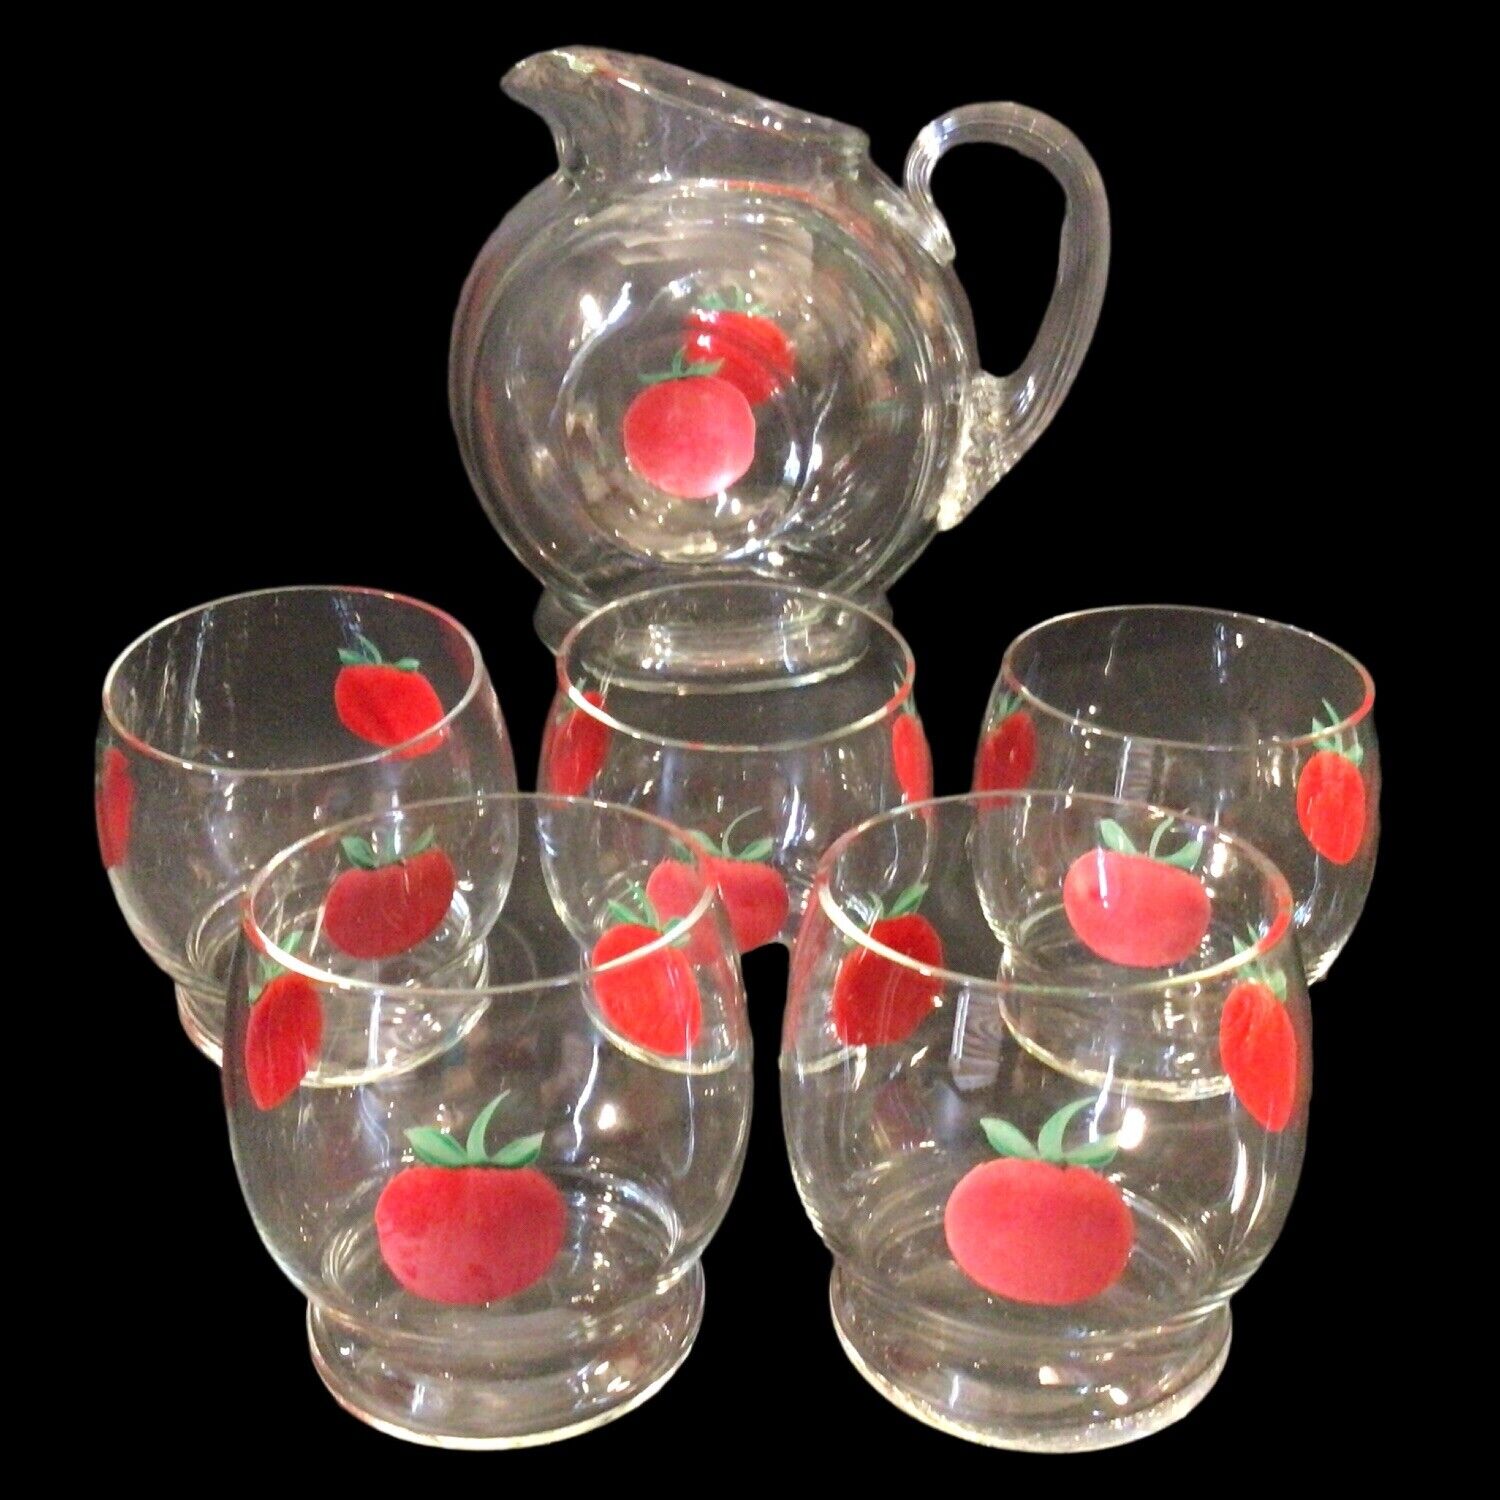 Vintage Glass Pitcher with 5 Juice Glasses Mid Century Modern Hand Painted